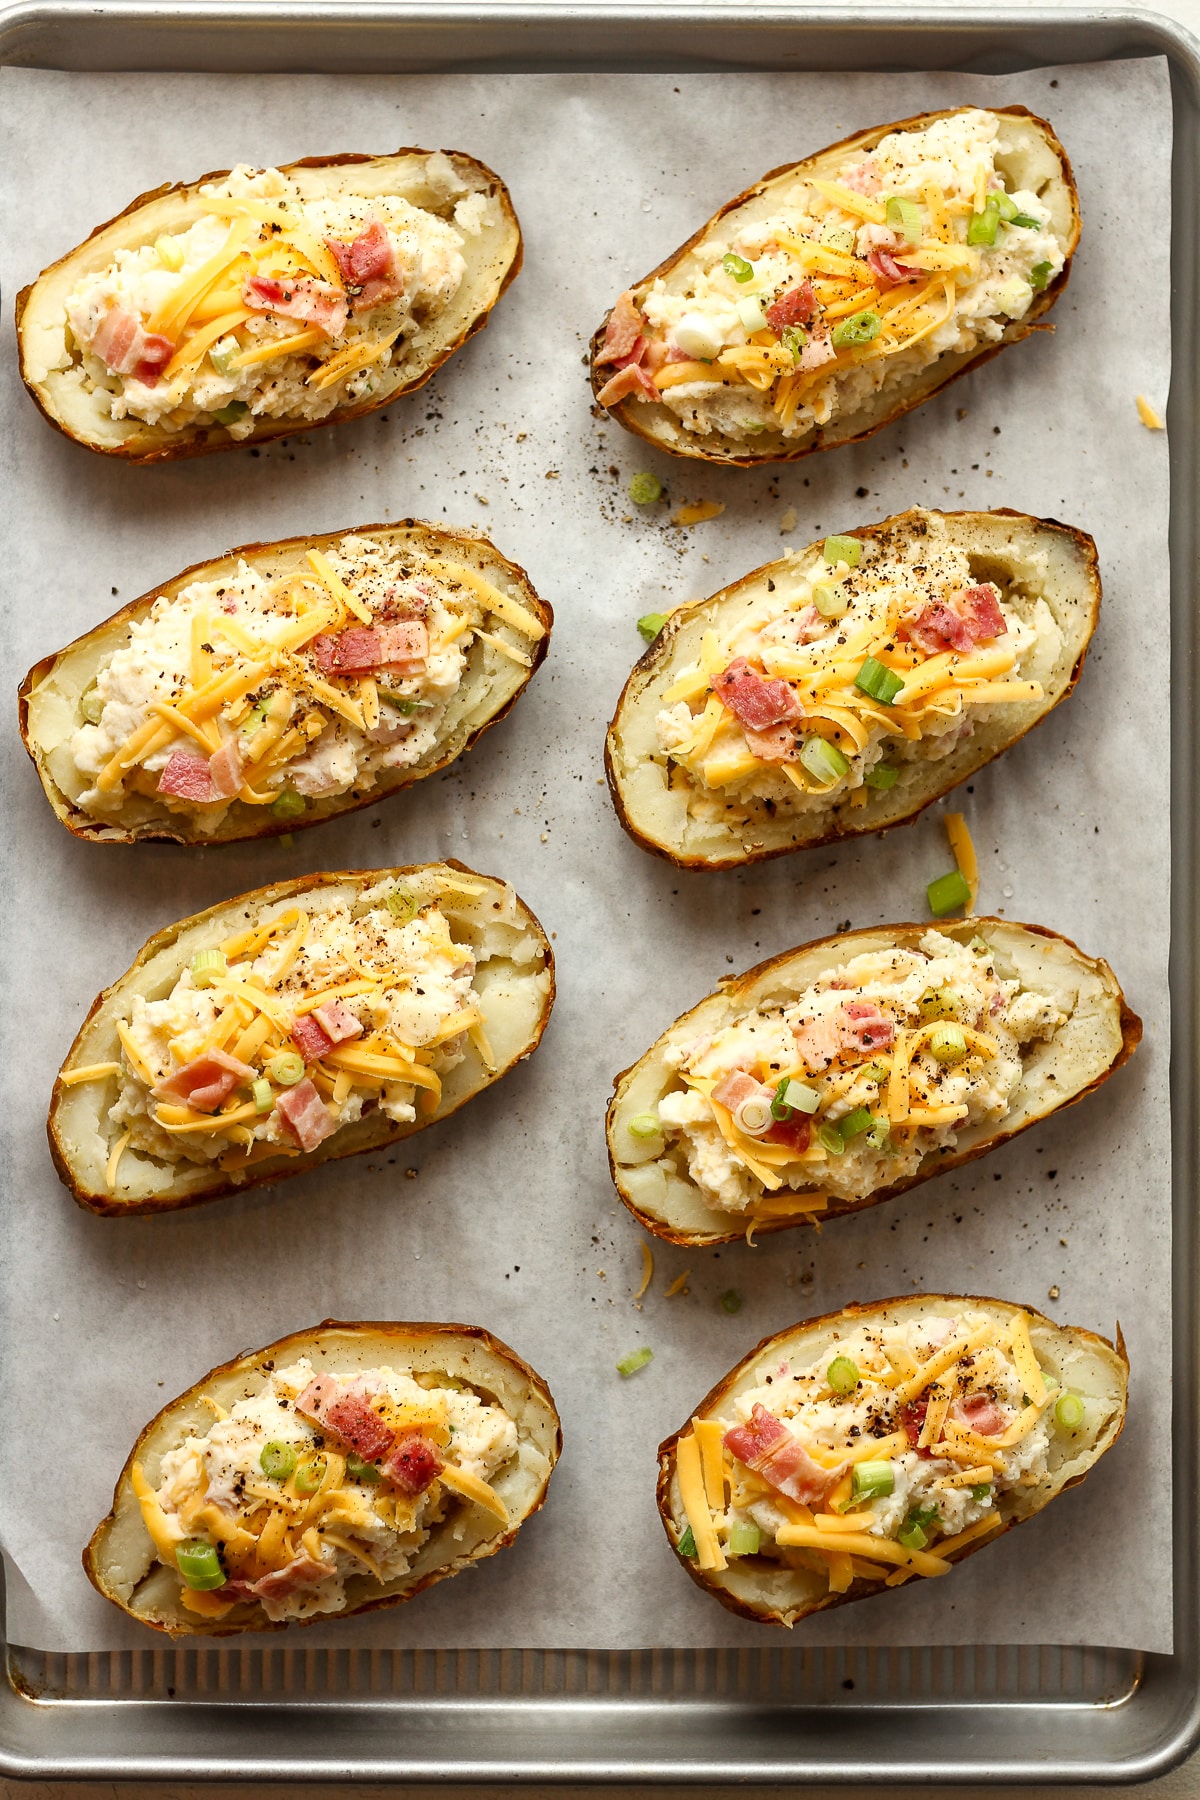 The potato skins with filling inside.